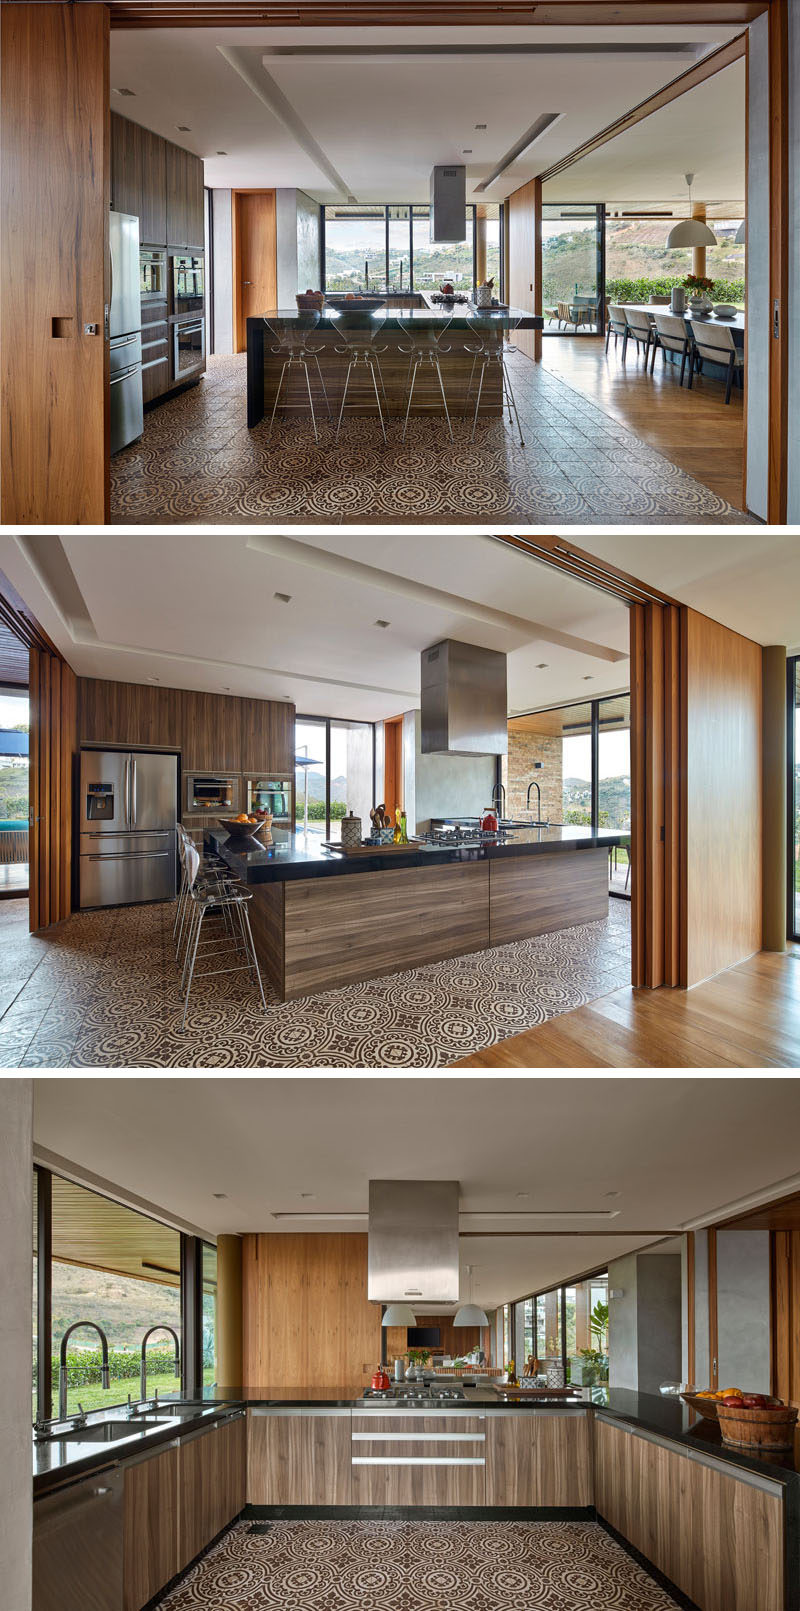 Wood walls open to reveal the kitchen and extends the living area of this modern house. Patterned tiles help to define the kitchen, while a black countertop contrasts the rich wood cabinets. #ModernKitchen #SlidingWoodWalls #InteriorDesign